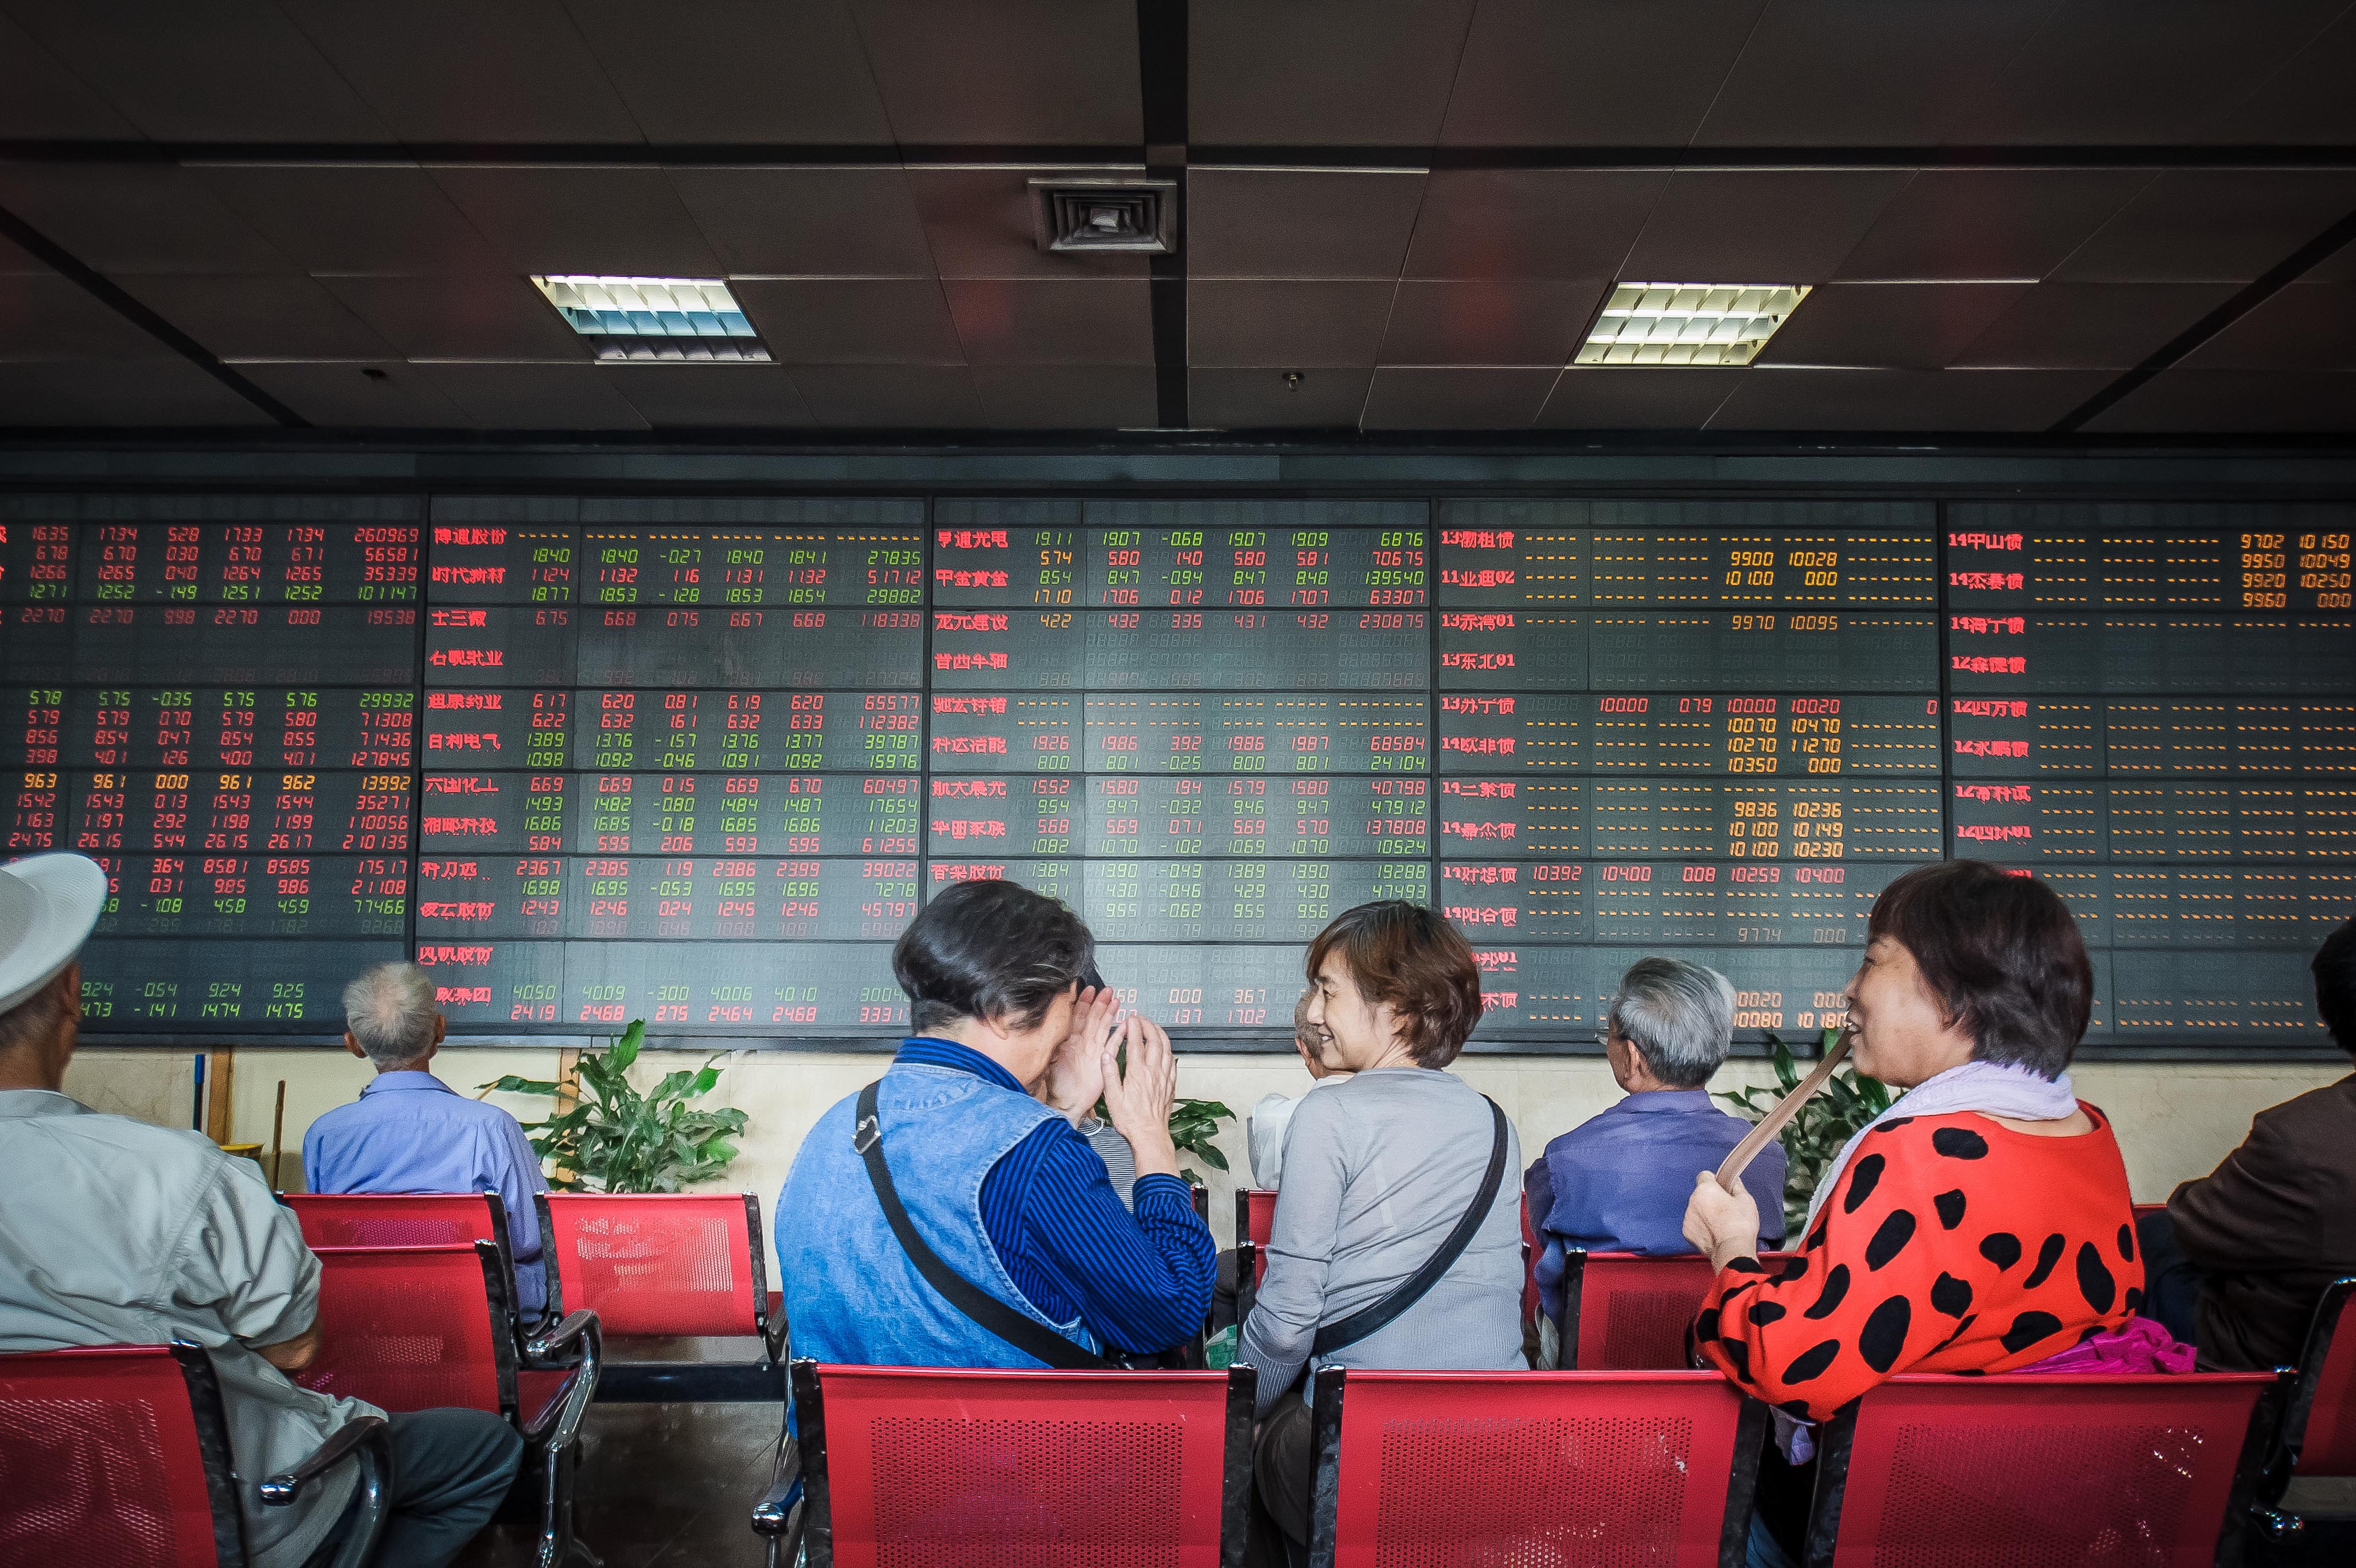 (141008) -- HEFEI, Oct. 8, 2014 (Xinhua) -- Investors check stocks at a trading hall of a securities firm in Hefei, capital of east China's Anhui Province, Oct. 8, 2014. Chinese shares closed higher on Wednesday, with the benchmark Shanghai Composite Index up 0.80 percent to finish at 2,382.79 points. The Shenzhen Component Index rose 1.28 percent to close at 8,183.65 points. (Xinhua/Du Yu) (mp)